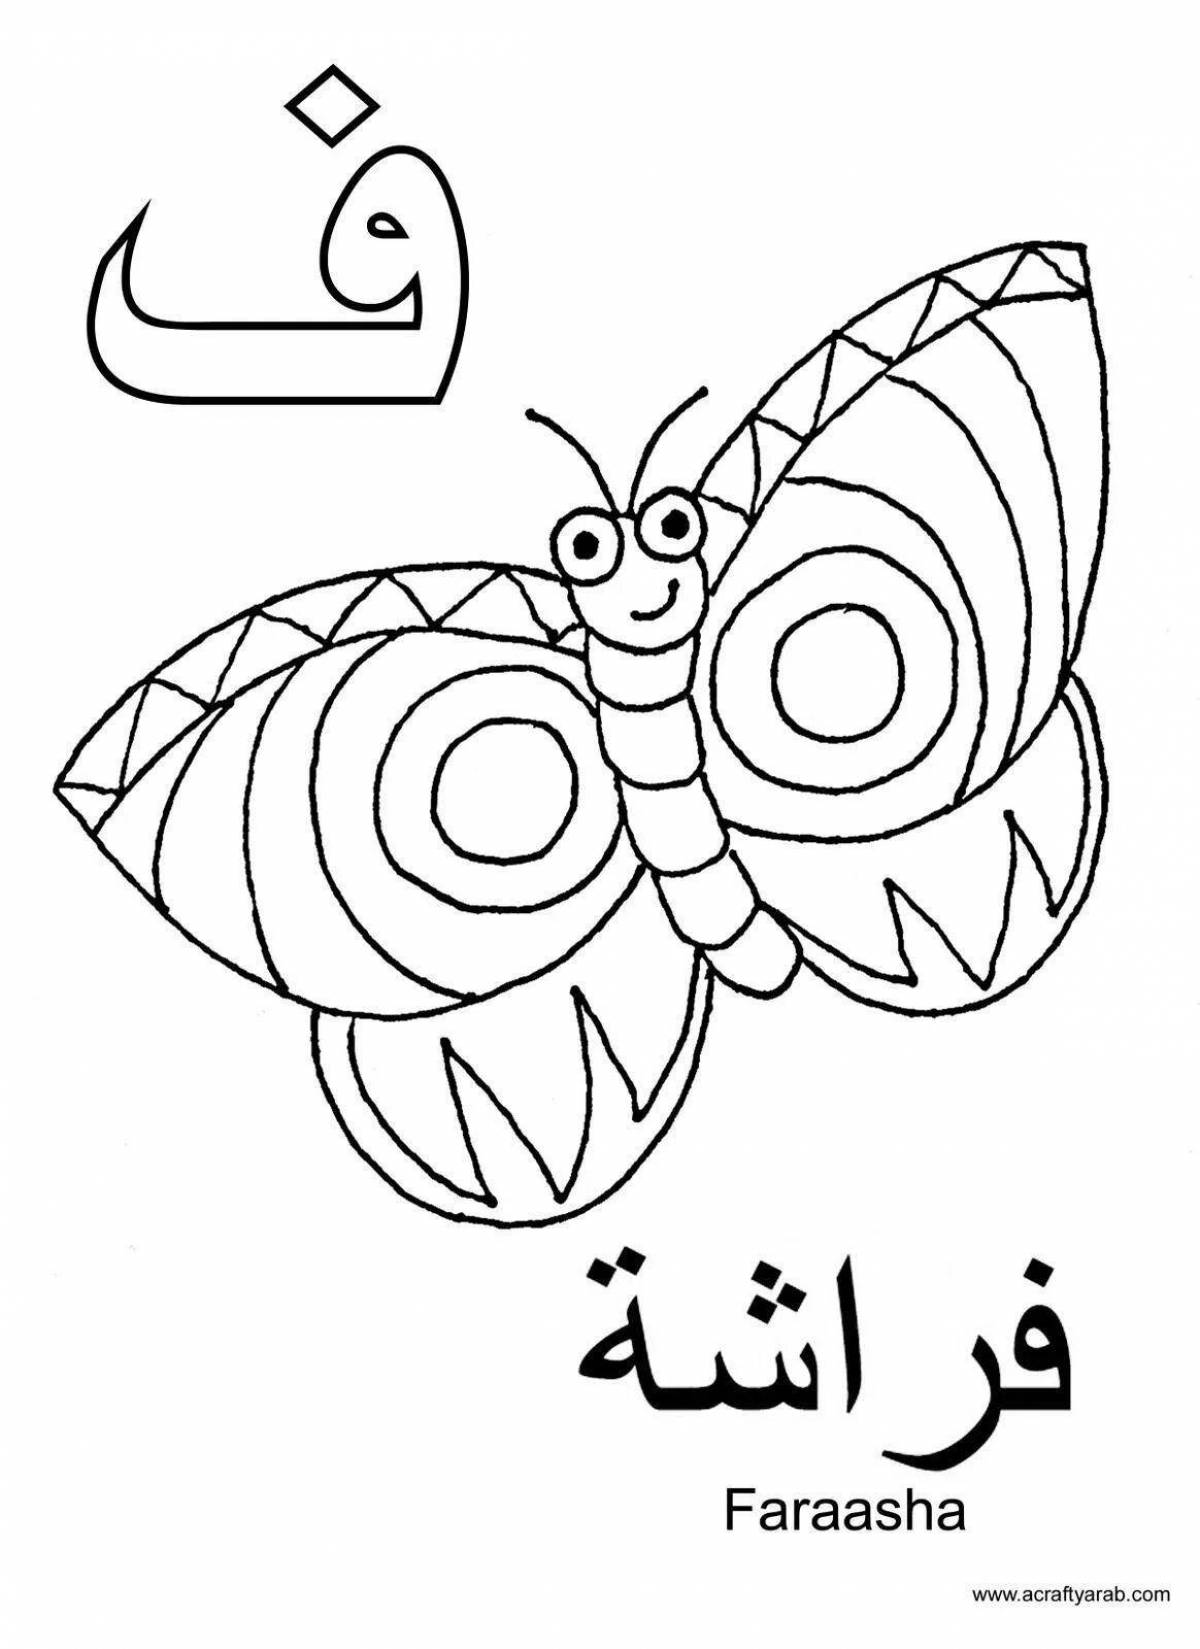 Arabic coloring book for kids